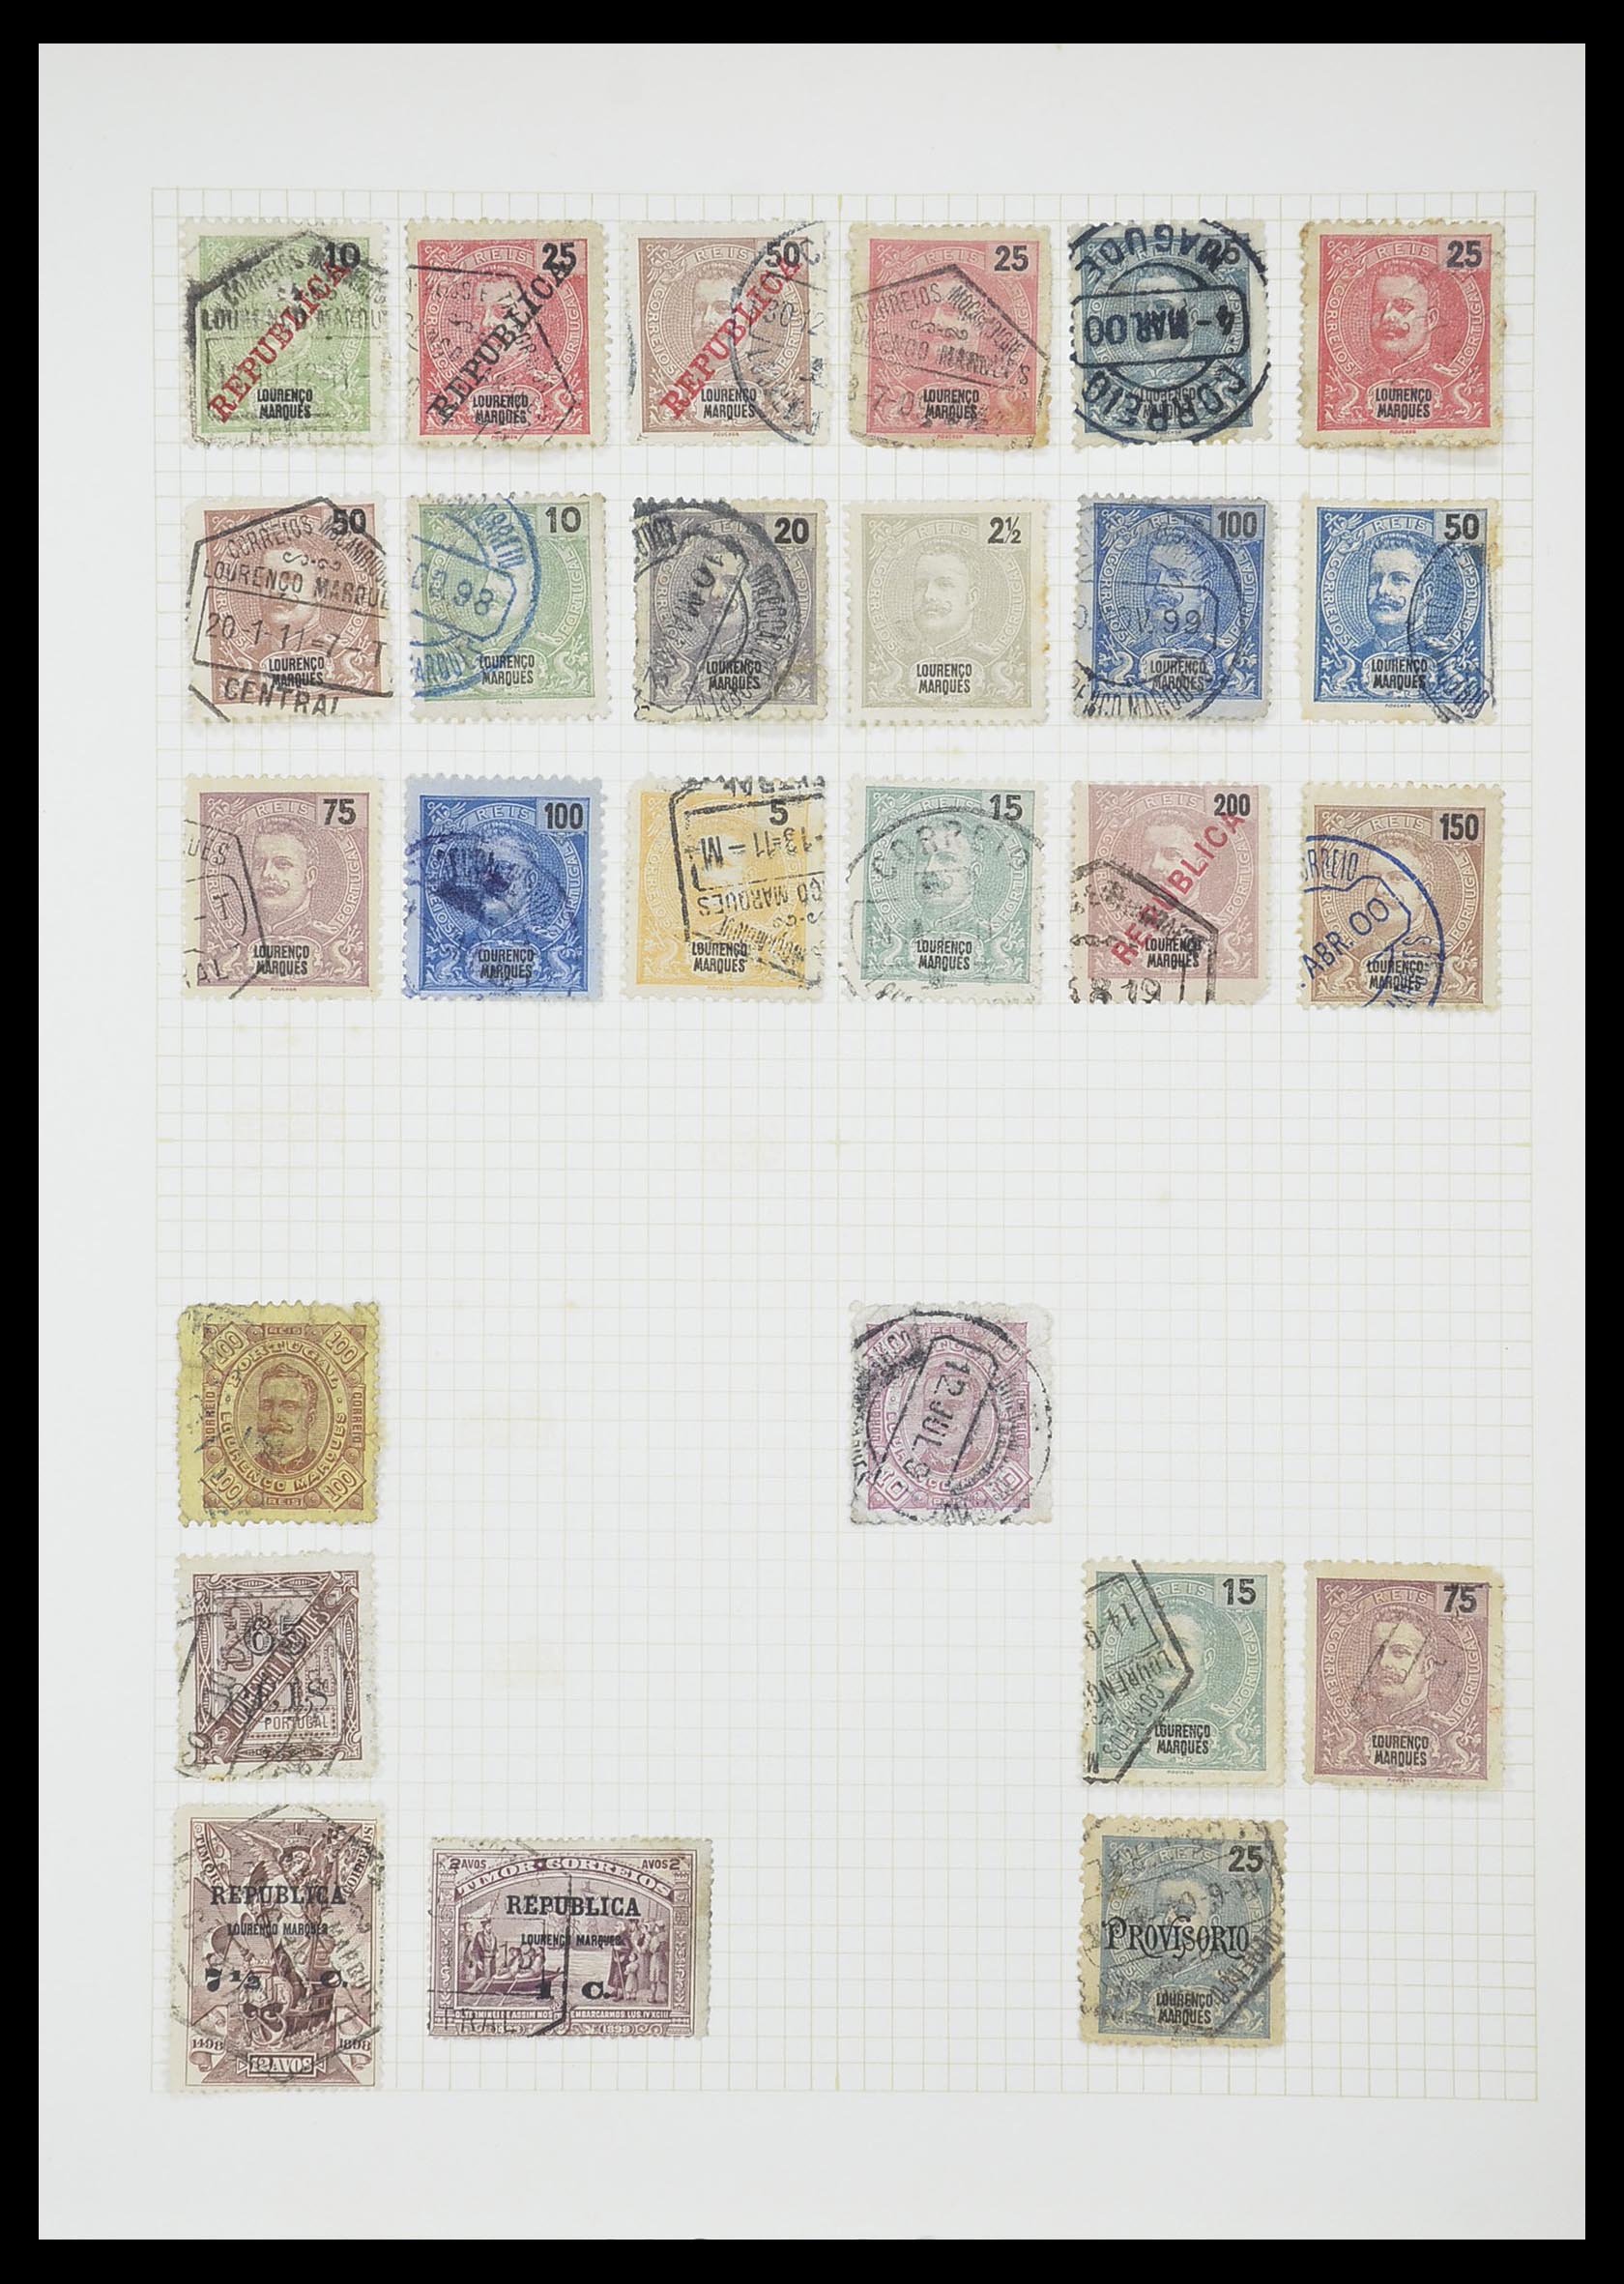 33429 033 - Stamp collection 33429 Portugese colonies 1868-1960.